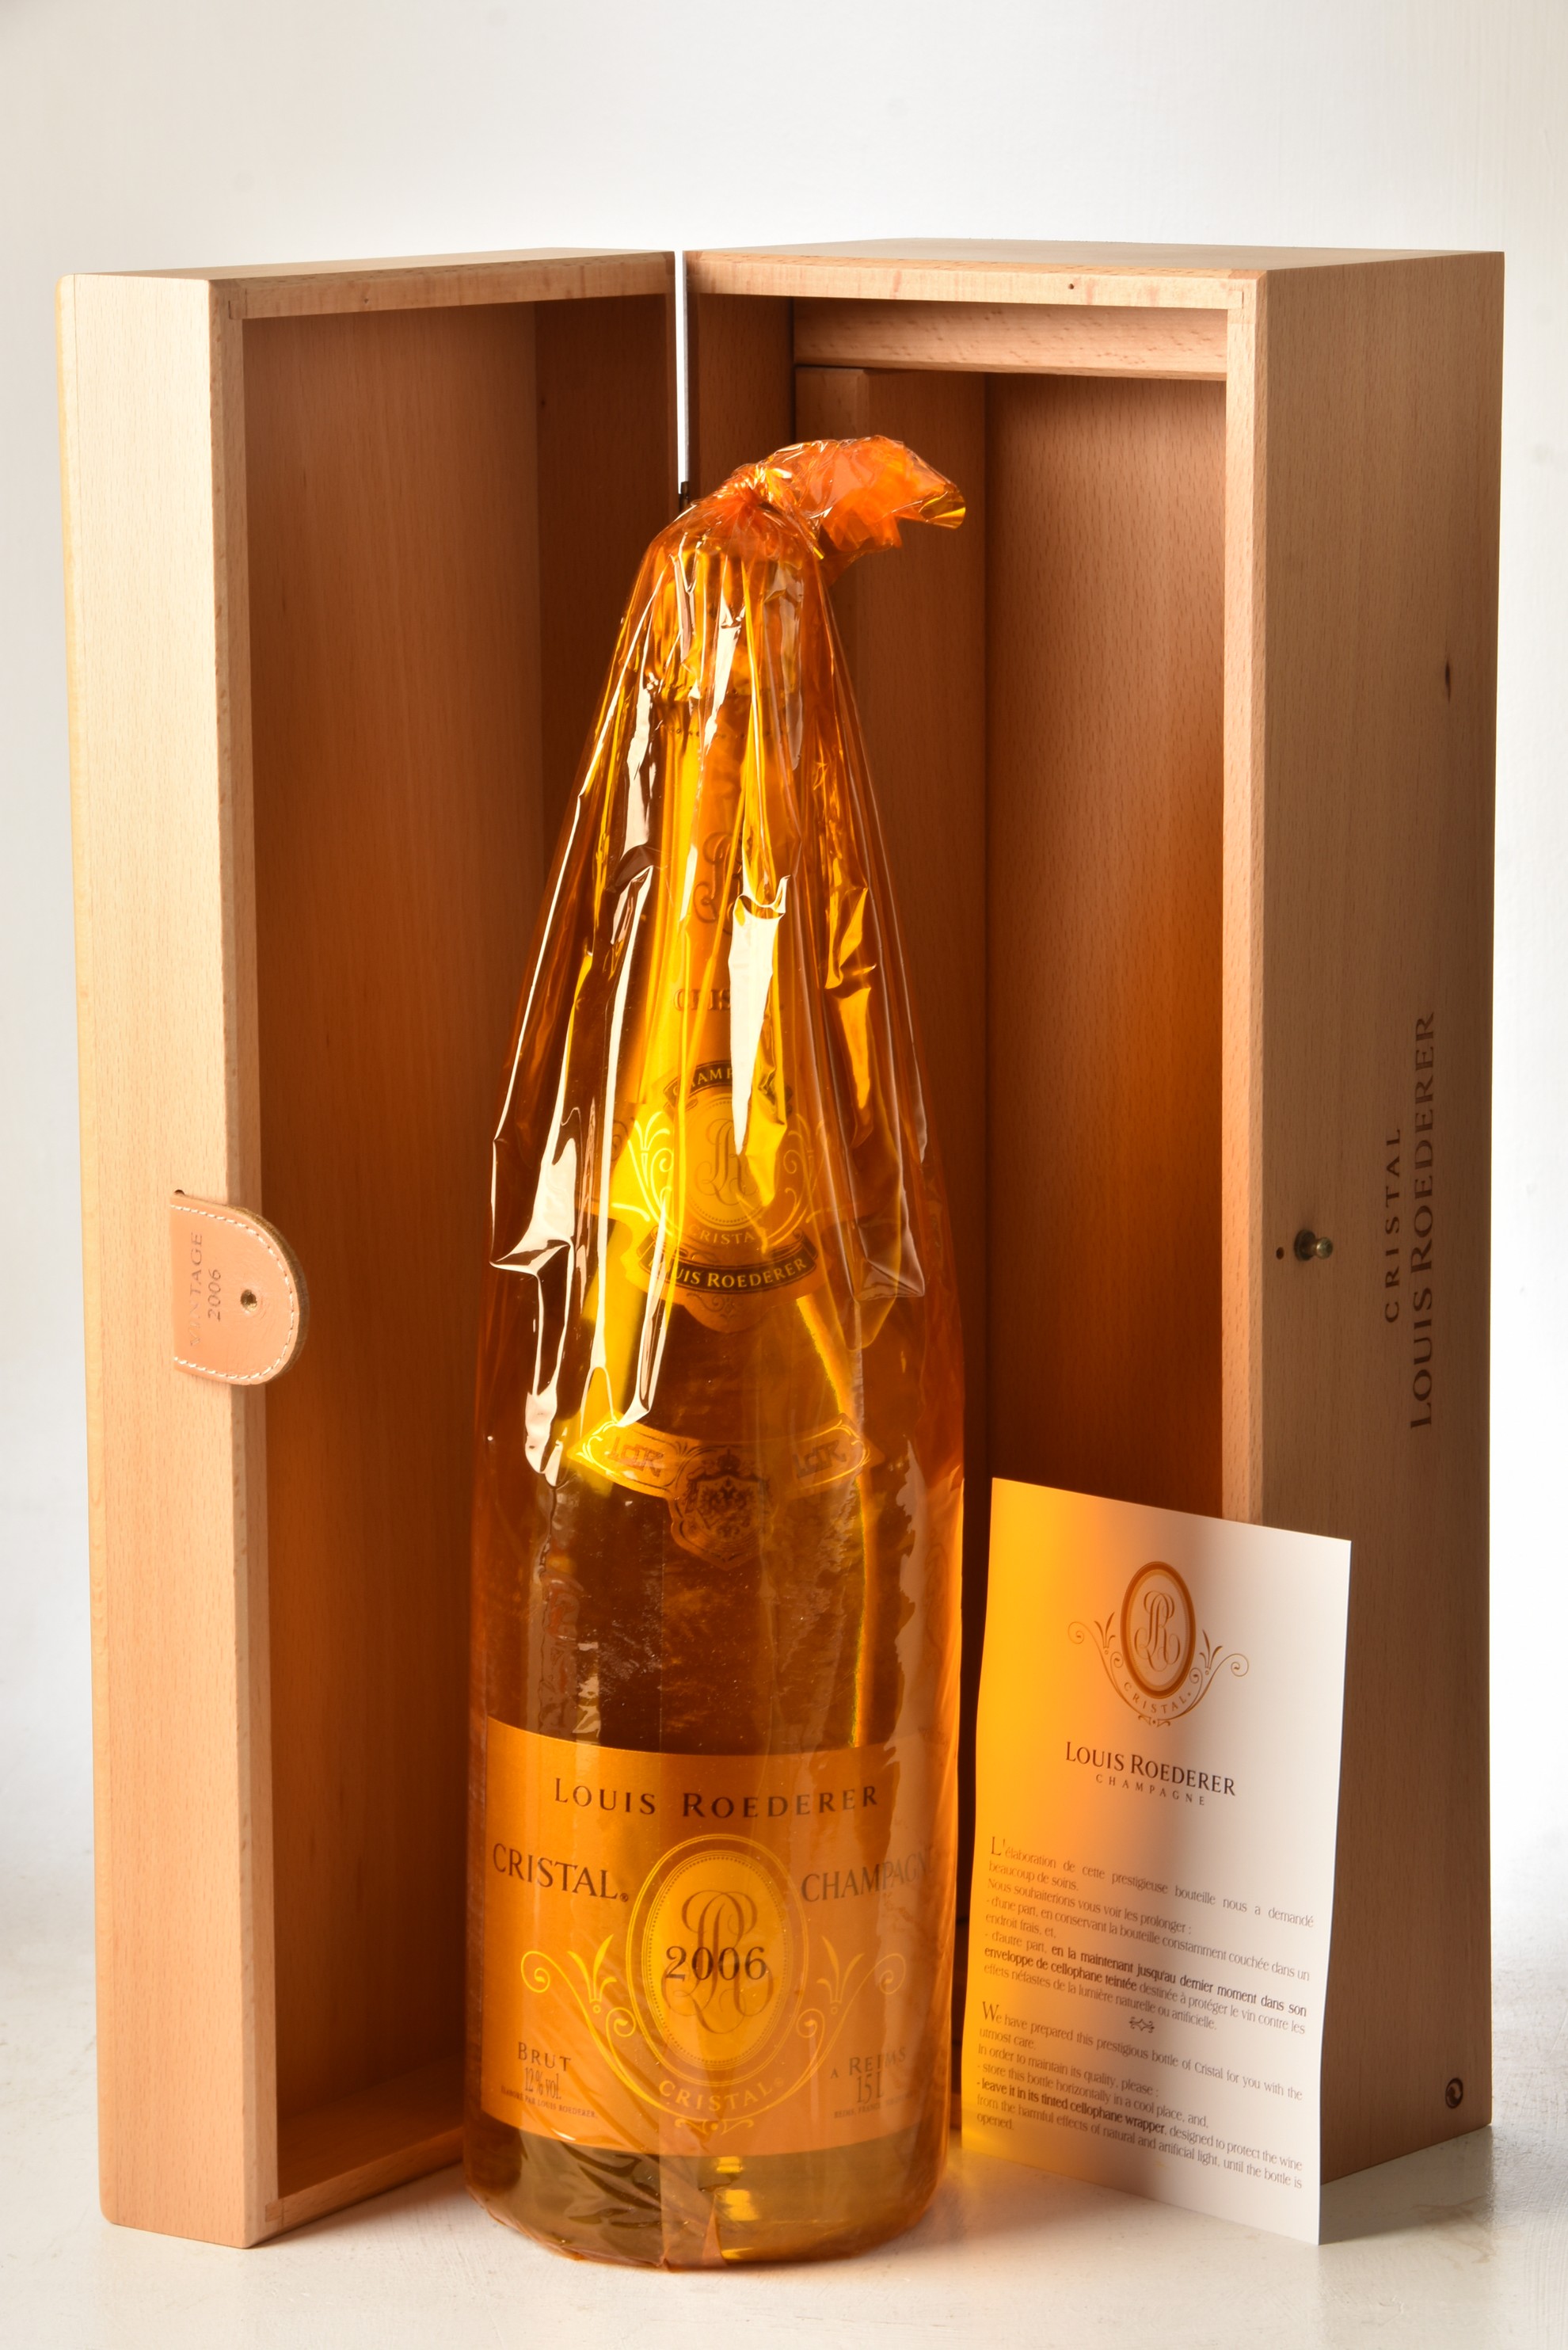 Champagne Louis Roederer Cristal 2006 1 mag OWC IN BOND